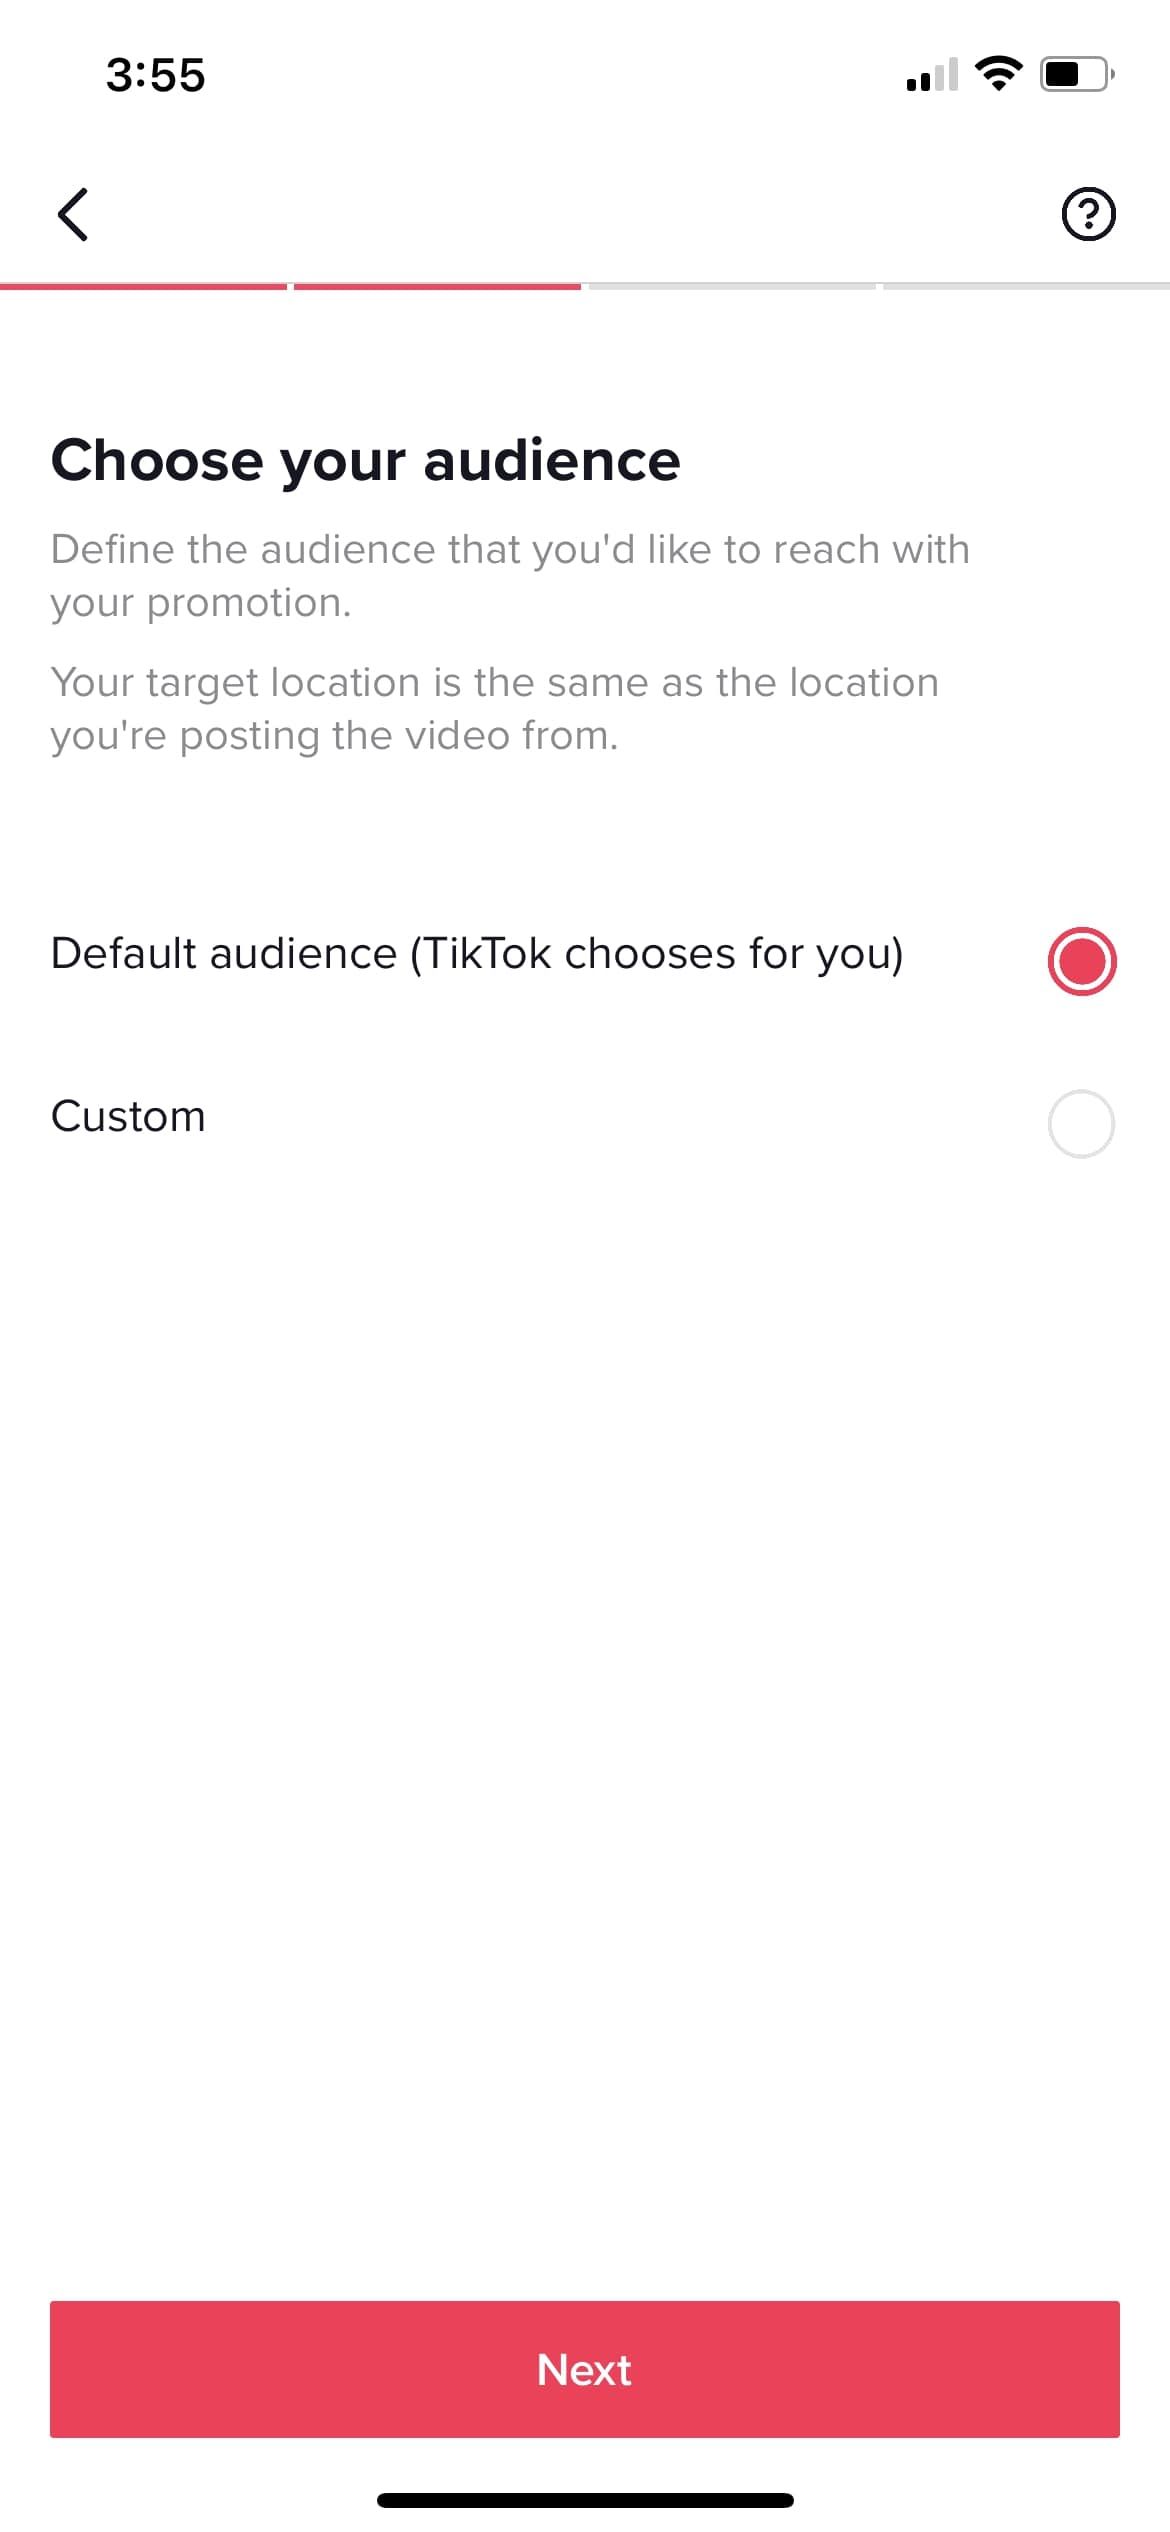 Screenshot of the choose your audience page for TIkTok promote